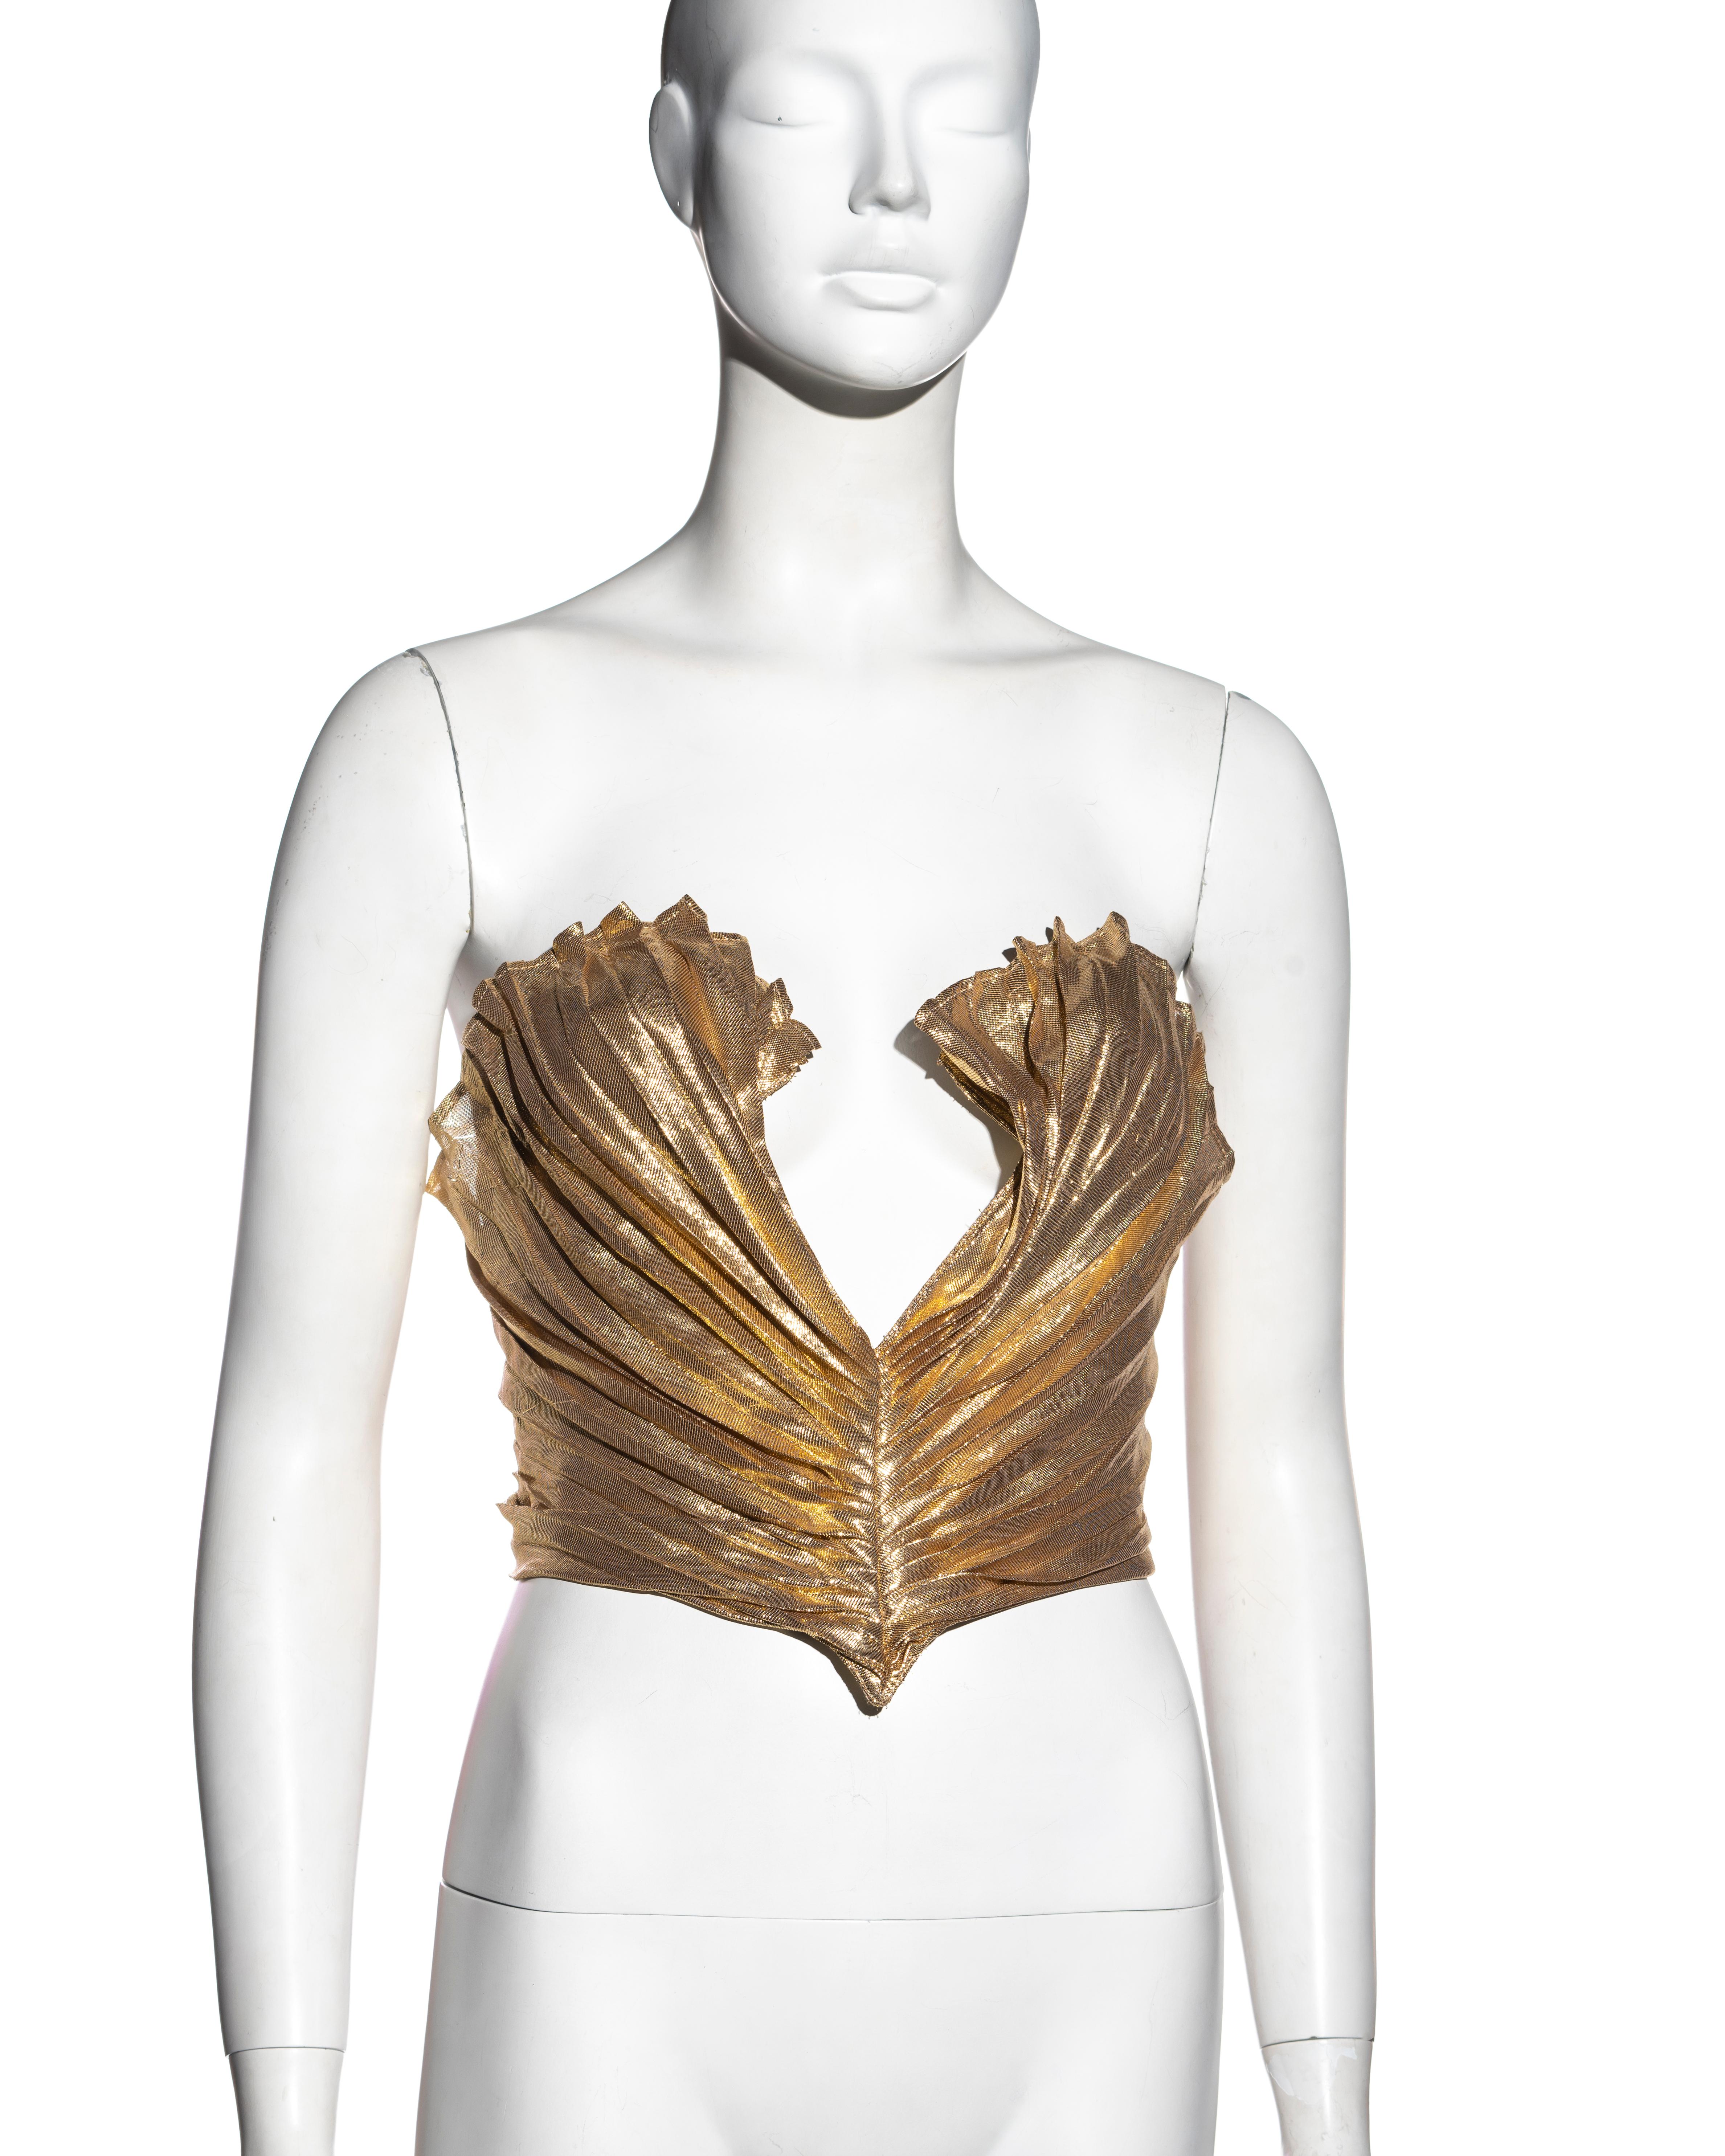 ▪ Thierry Mugler gold pleated strapless corset
▪ Overlay refined with knife-pleats
▪ Built-in corset
▪ Plunging neckline
▪ Metal snap buttons and hook fastenings to the center-back opening
▪ 67% Silk, 33% Polyester
▪ FR 36 - UK 8 - US 4
▪